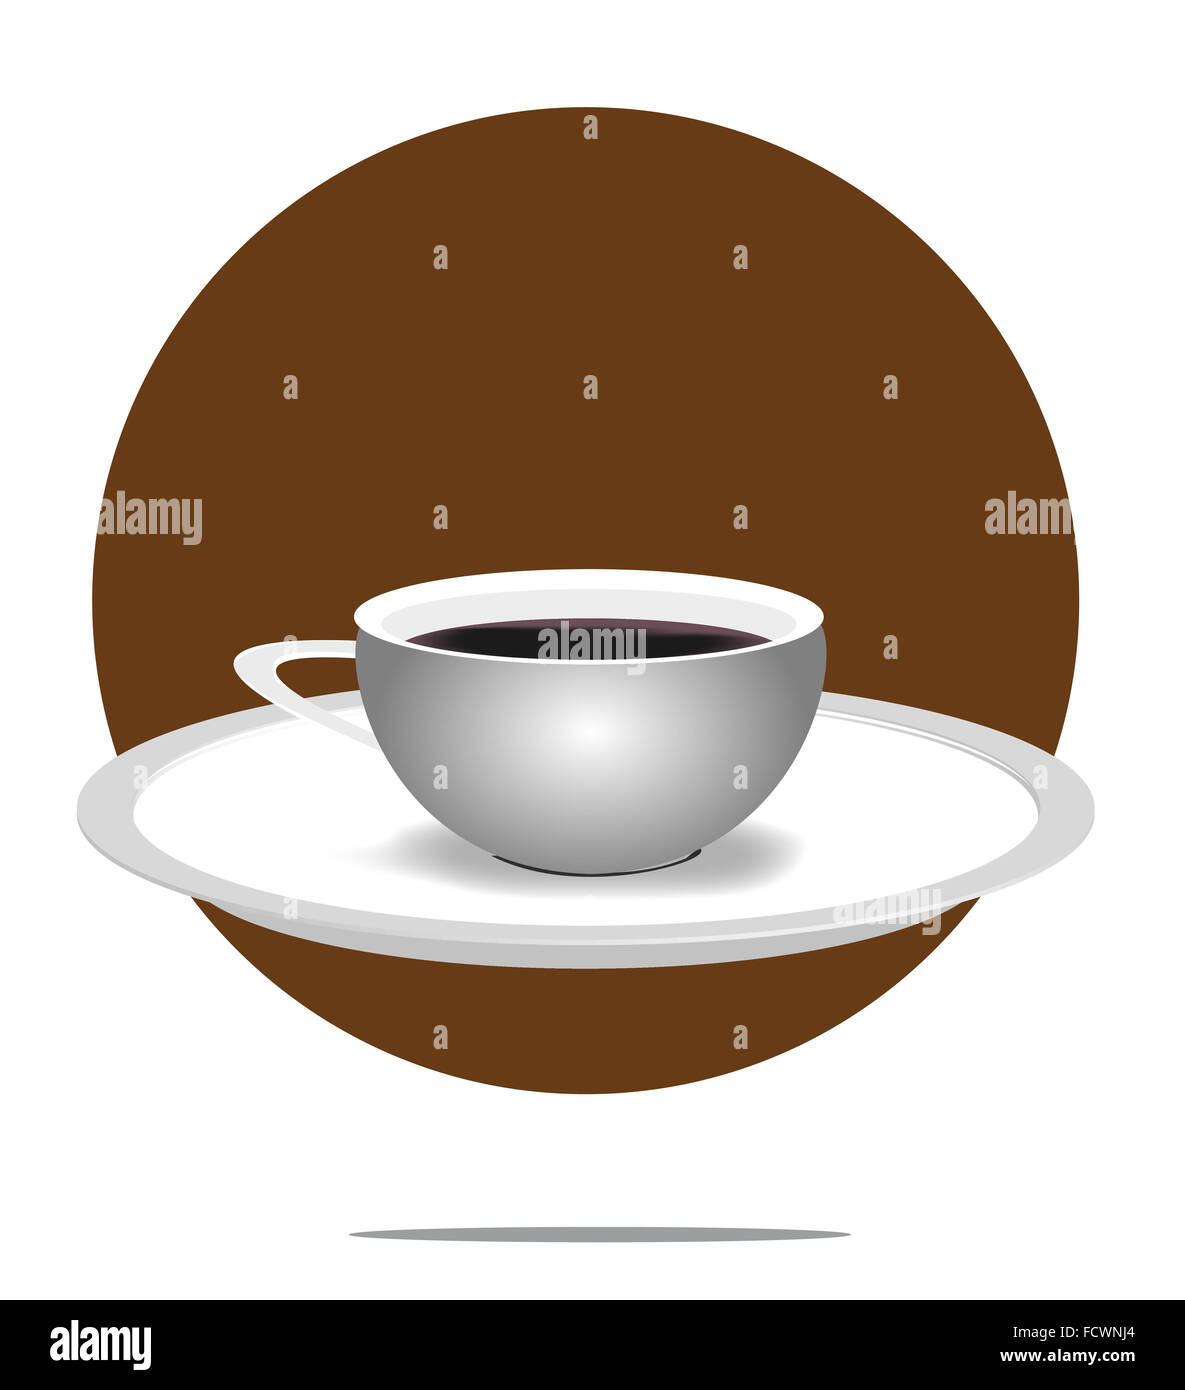 Metal coffee maker and a pattern of coffee beans in the shape of a circle  on a gray background with Stock Photo by Artjazz